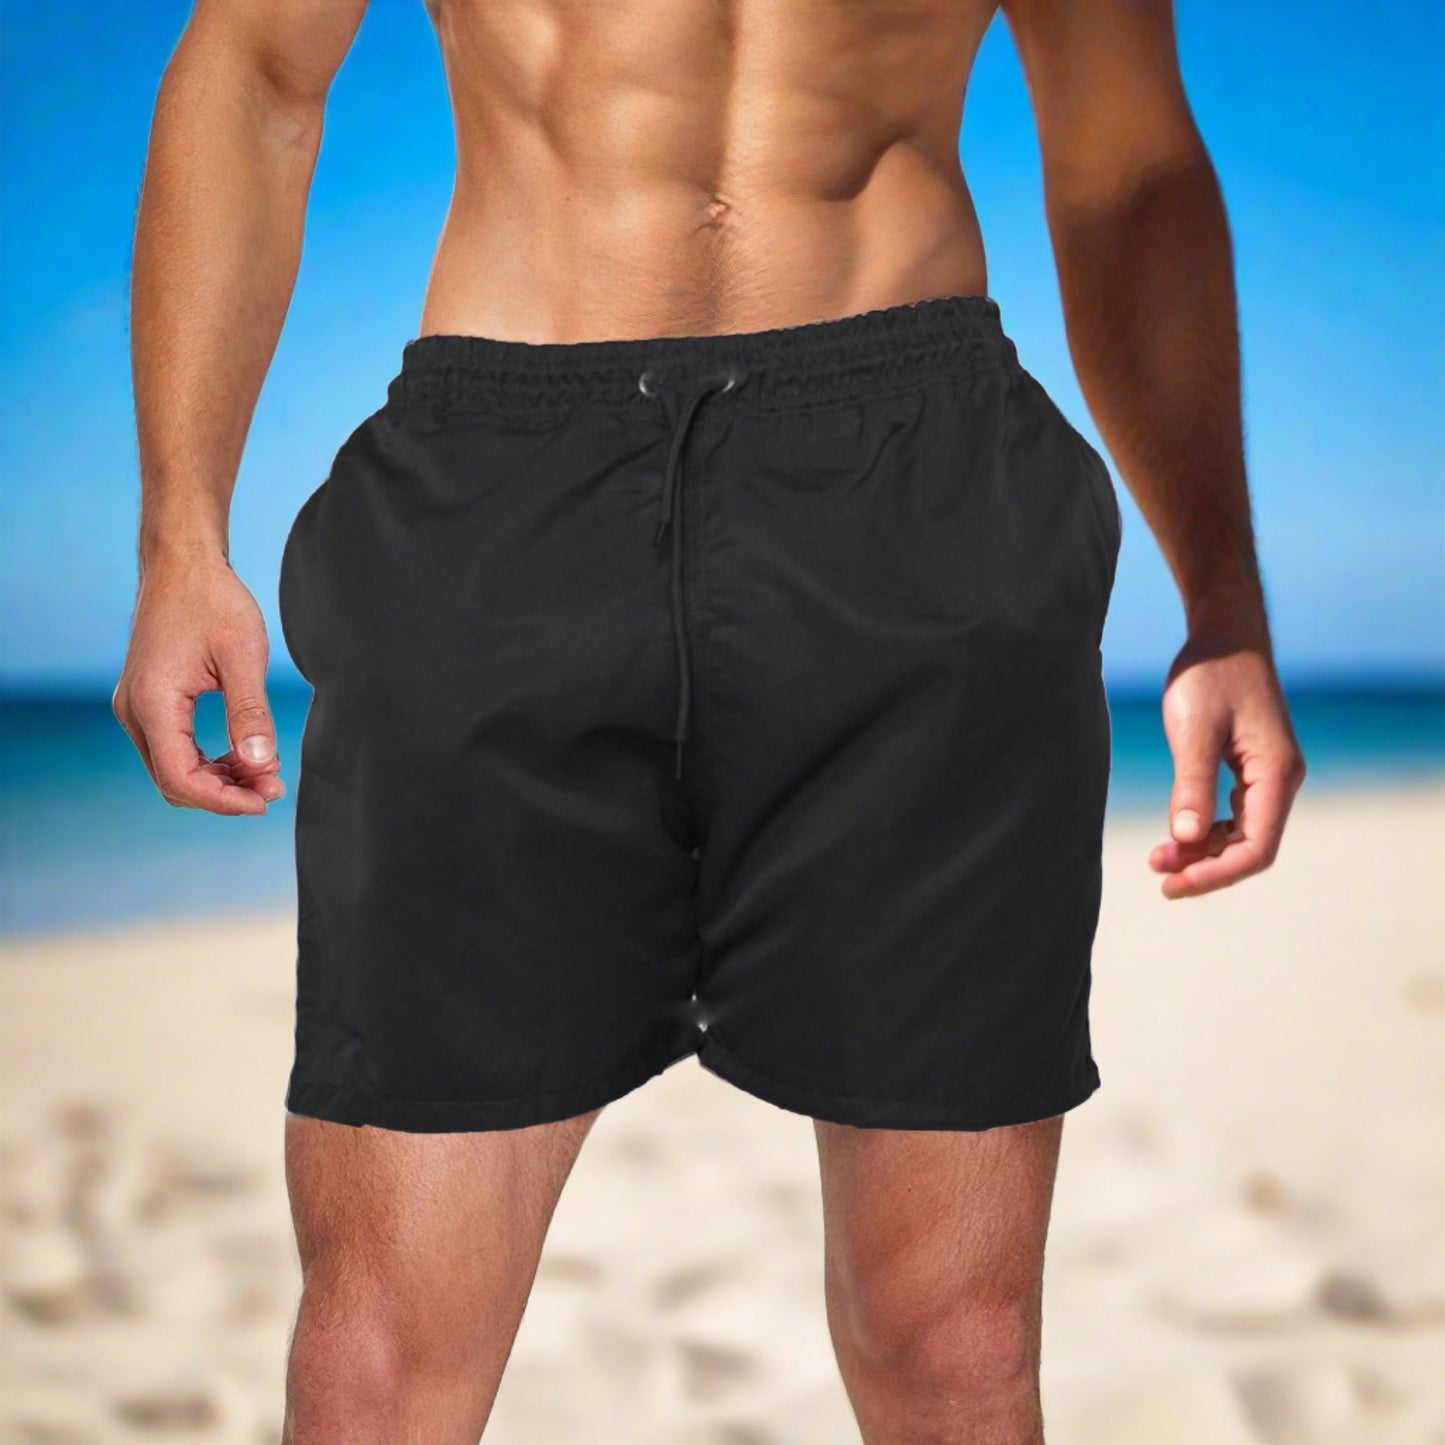 Mens Swimming Short Breathable Beach Holiday Cargo - TheComfortshop.co.ukClothes0721718972044thecomfortshopTheComfortshop.co.ukRegular Short BLACK SMALLBlackSmallMens Swimming Short Breathable Beach Holiday Cargo - TheComfortshop.co.uk